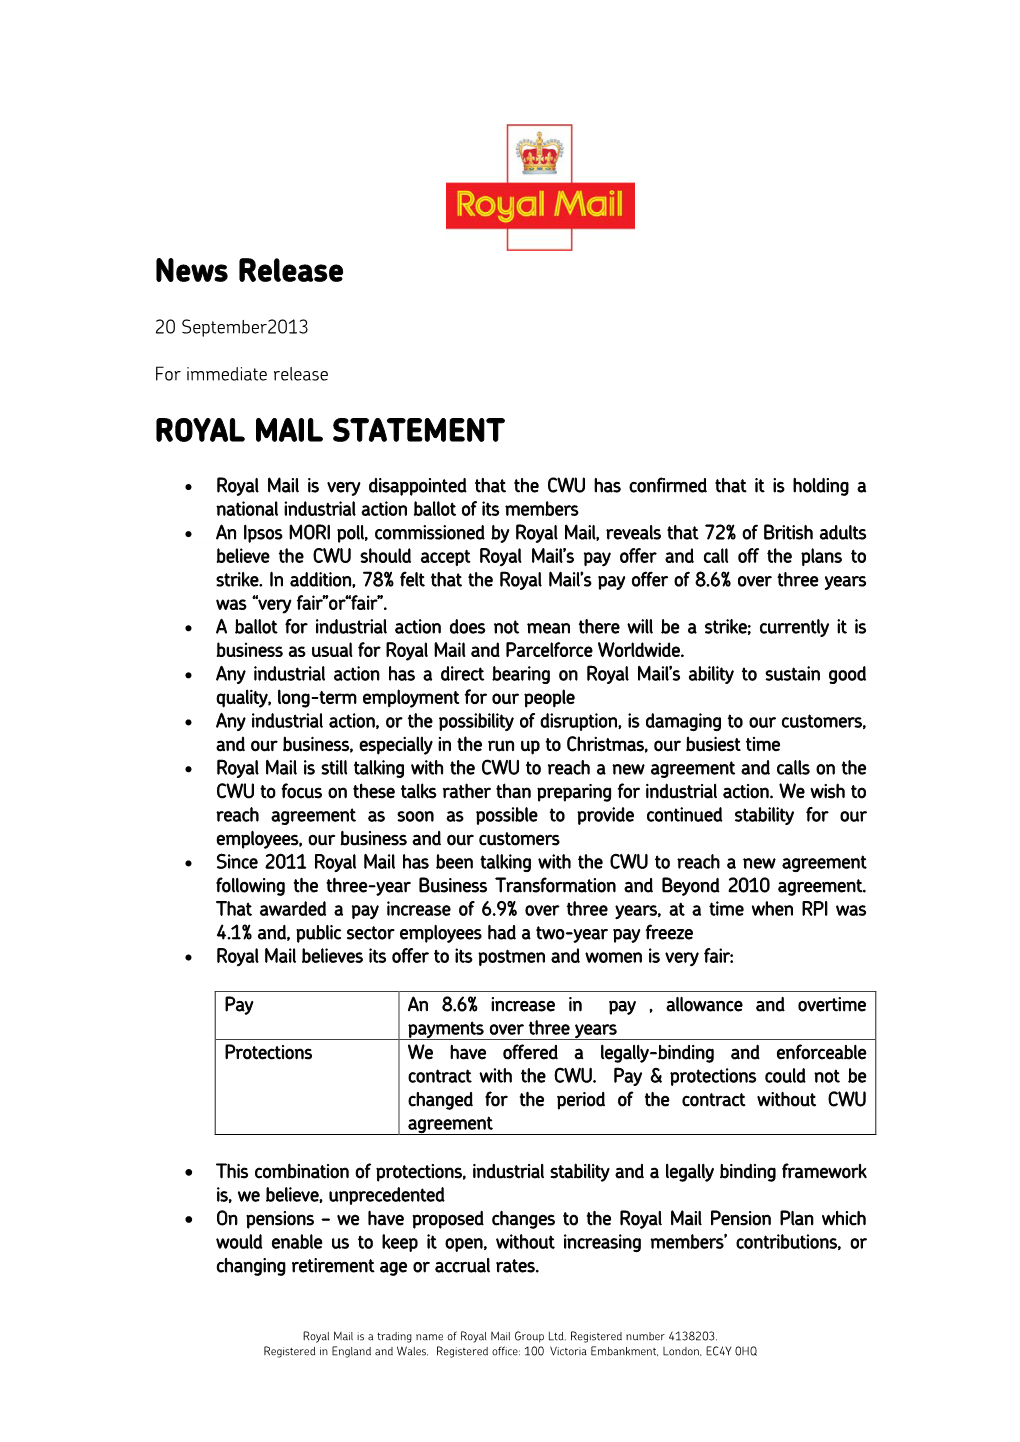 News Release ROYAL MAIL STATEMENT